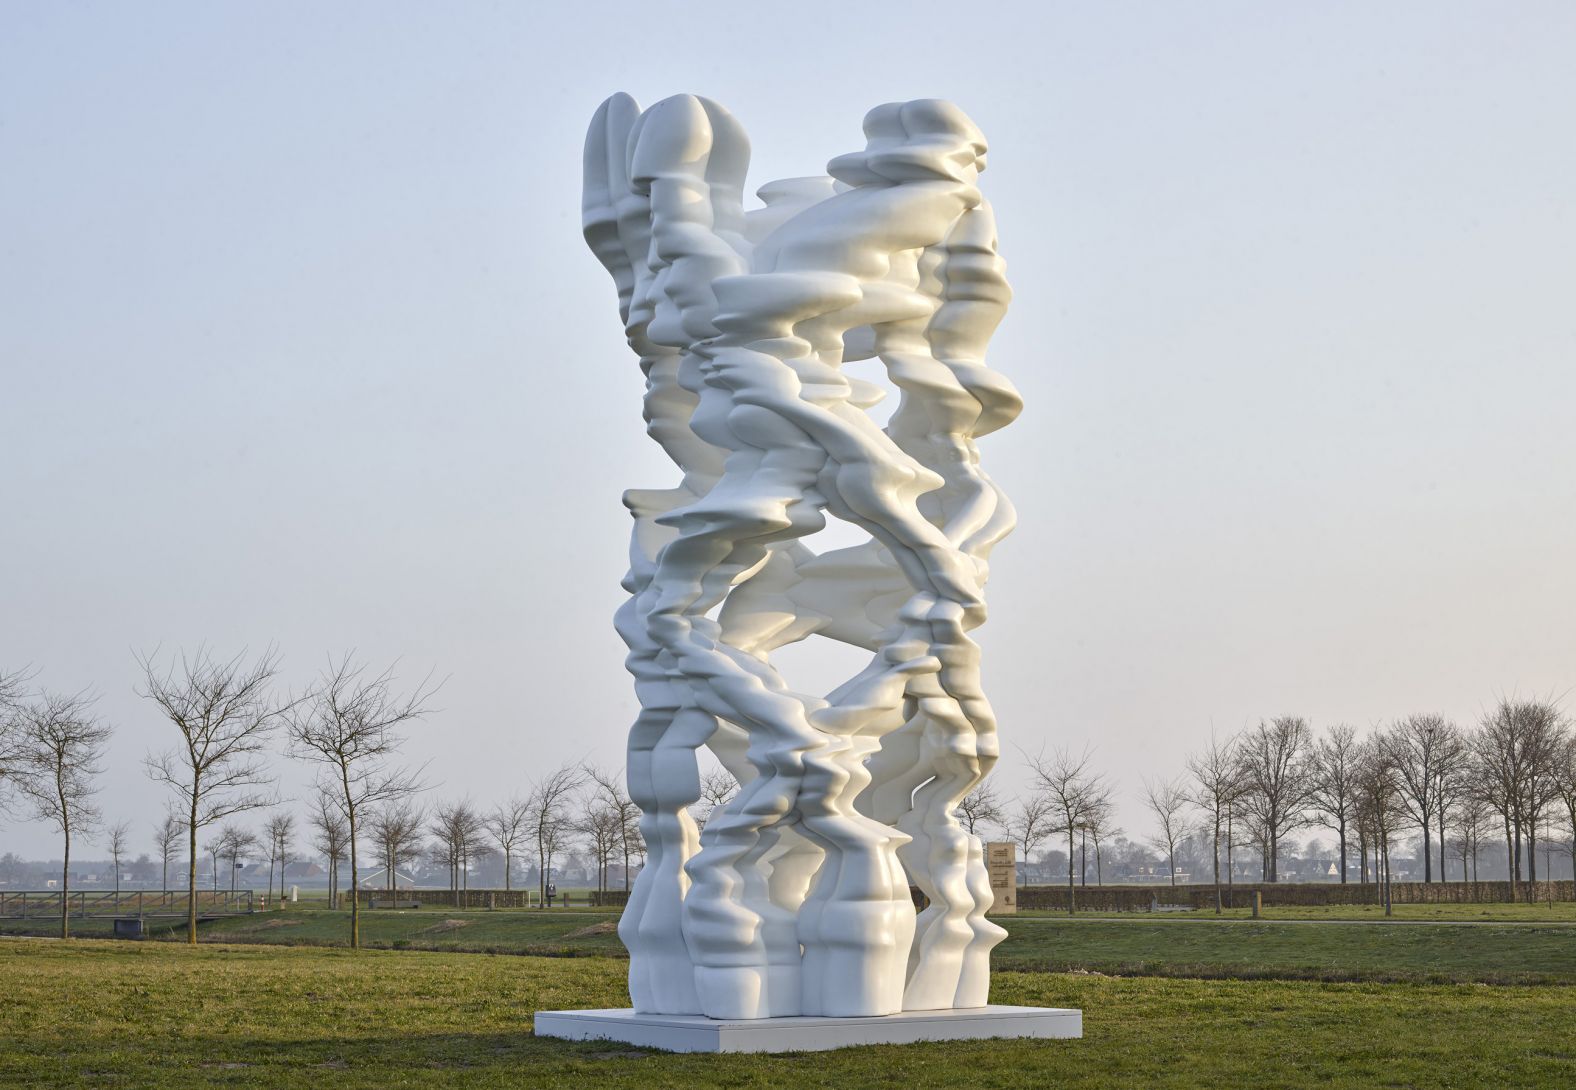 Tony Cragg "Points of View" in Museum Belvédère from 24 april to 26 september 2021 in Heerenveen